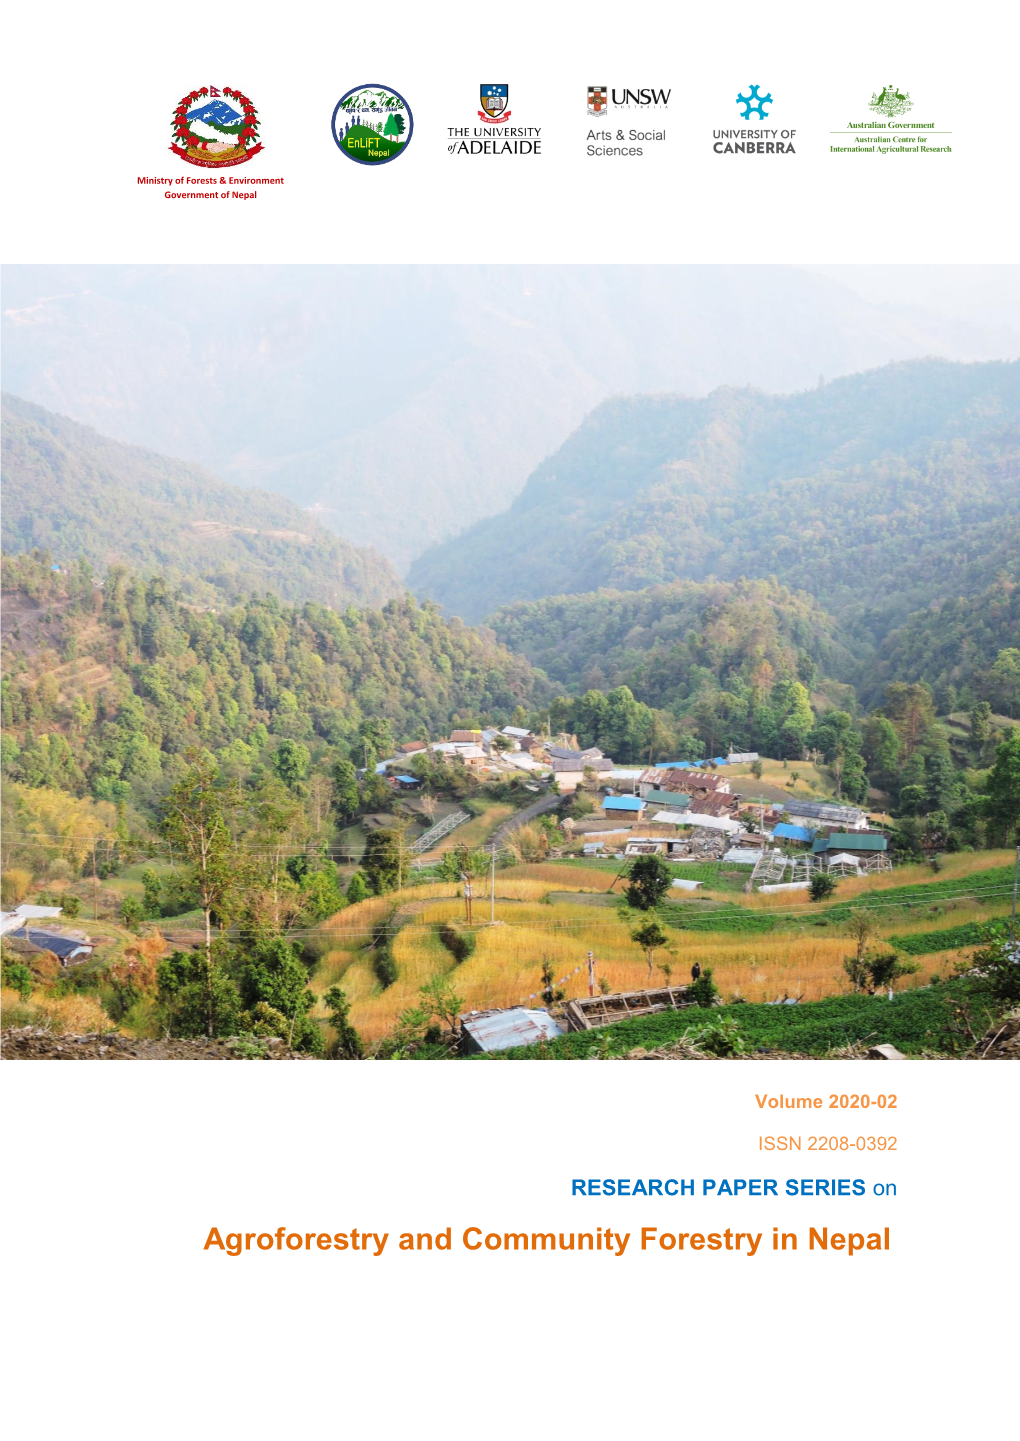 Enhancing Livelihoods and Food Security from Agroforestry and Community Forestry in Nepal